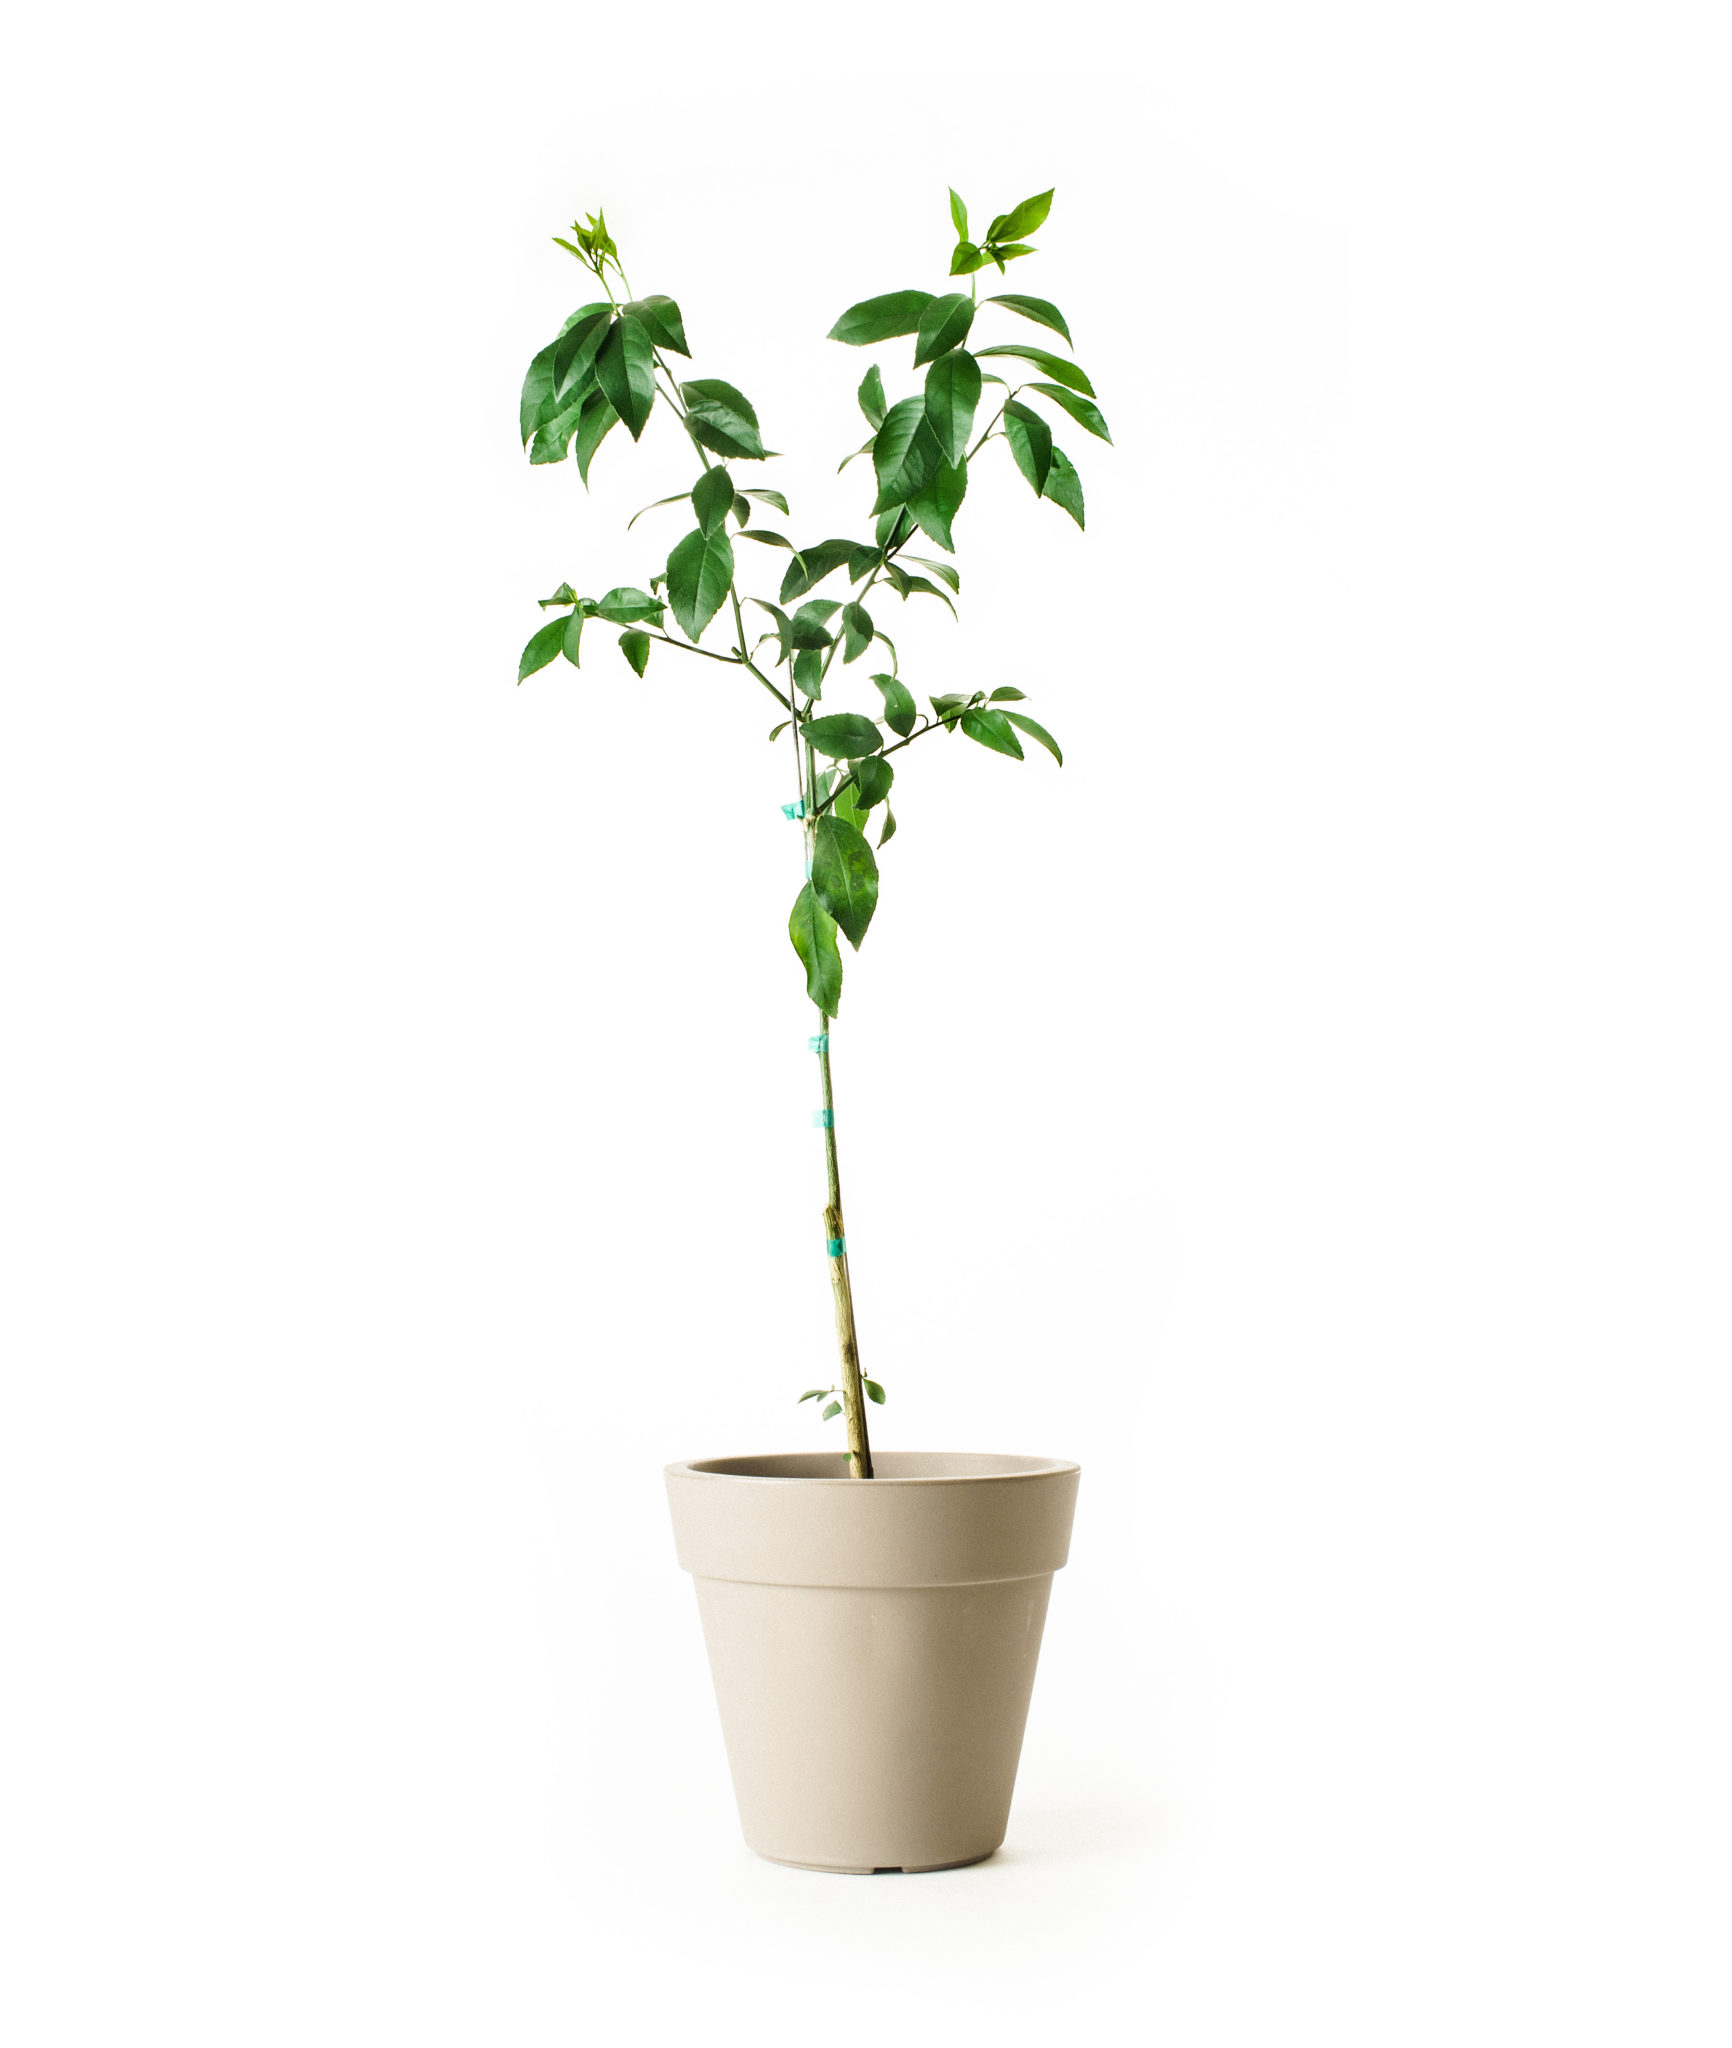 Image of Improved Meyer Lemon Tree (Age: 2 - 3 Years Height: 2 - 3 FT Ship Method: Delivery)